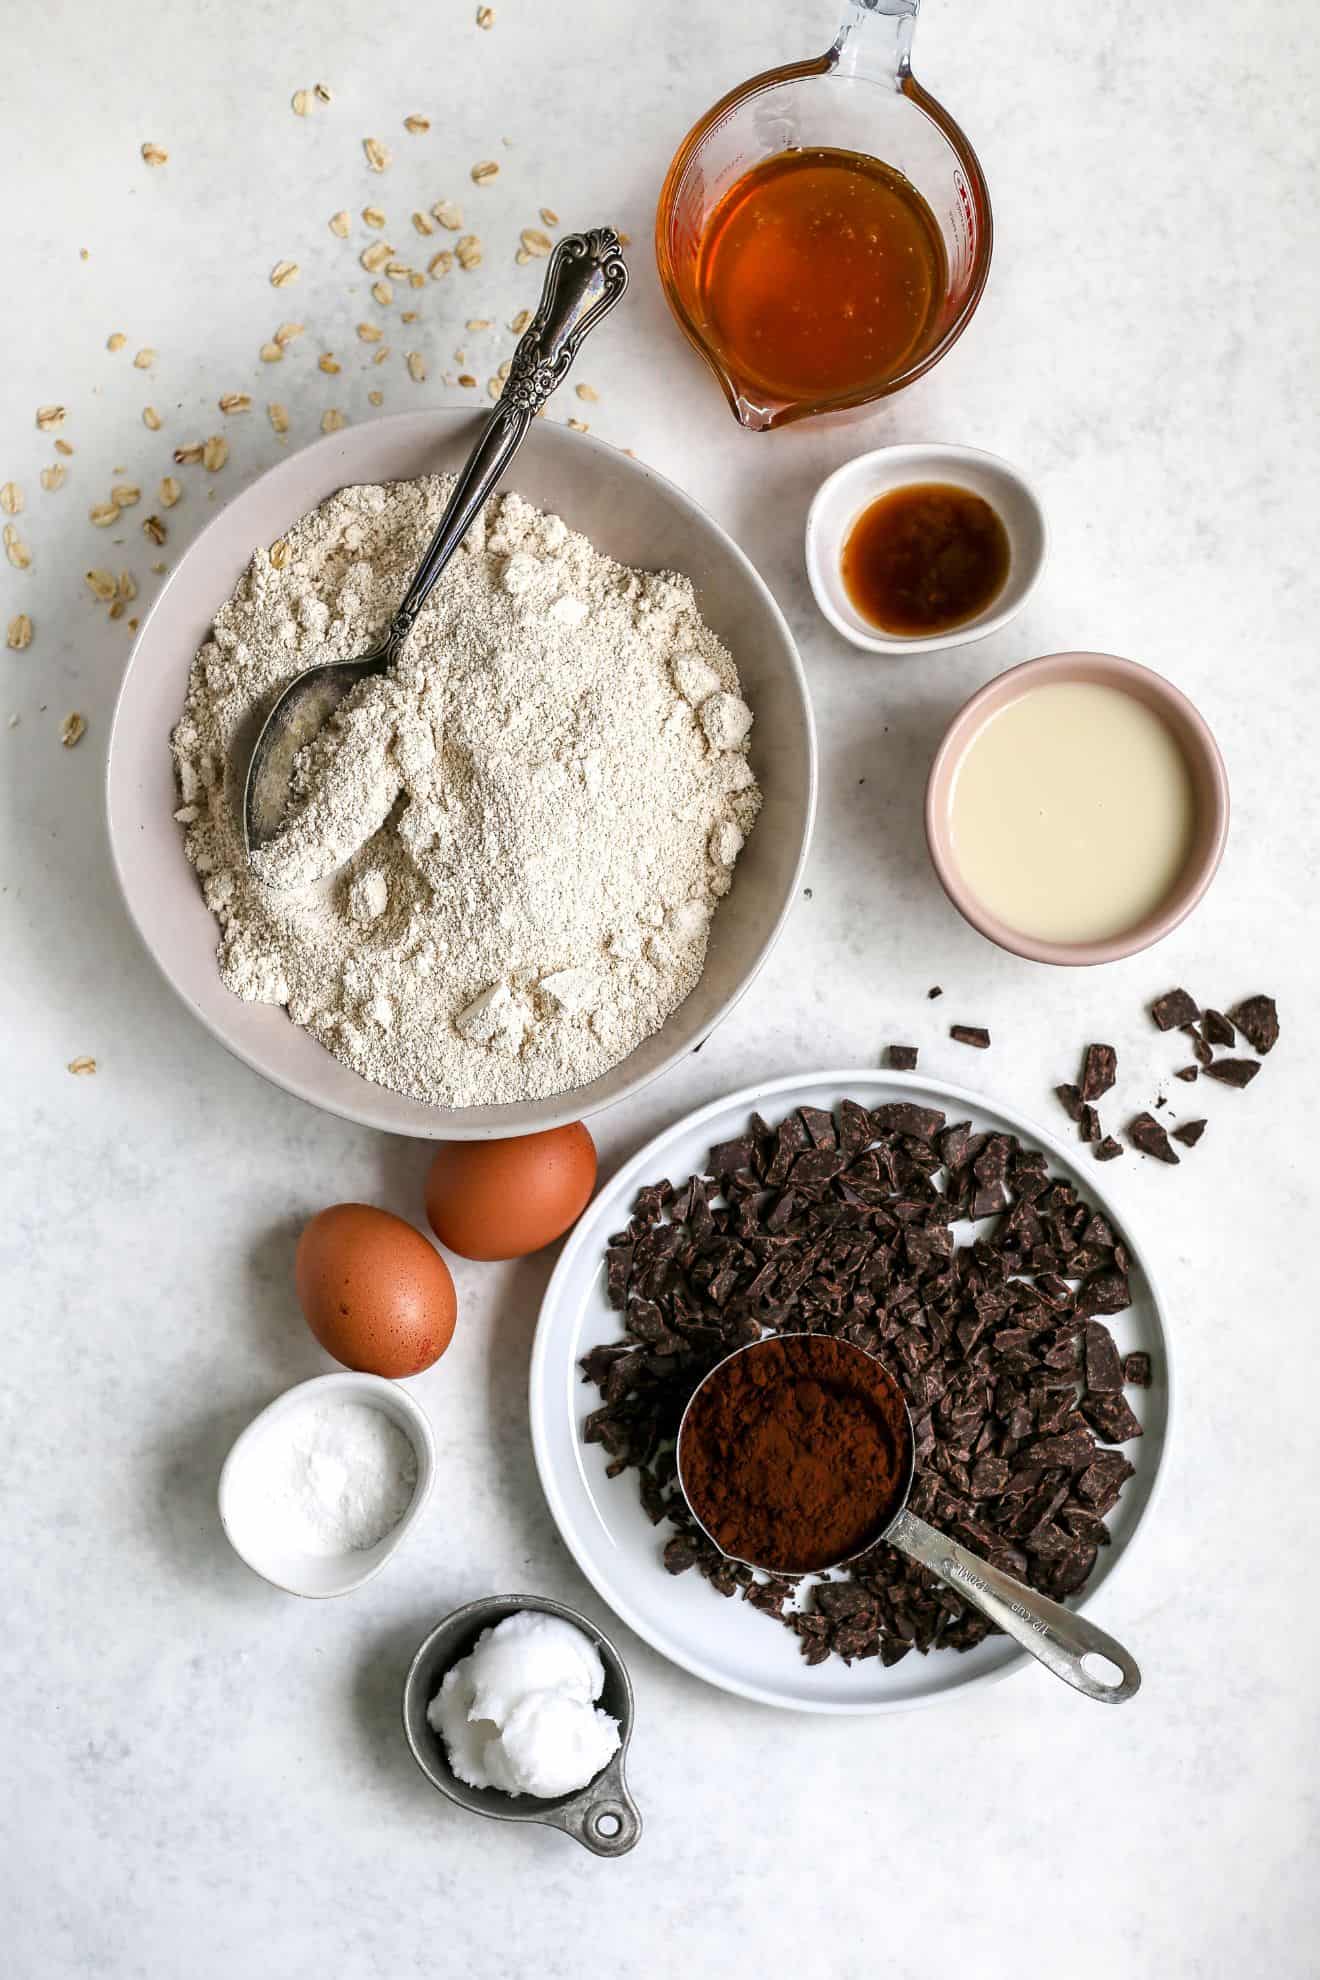 This is an overhead image of ingredients to make chocolate muffins. Bowls and plates of individual ingredients sit on a light grey surface.